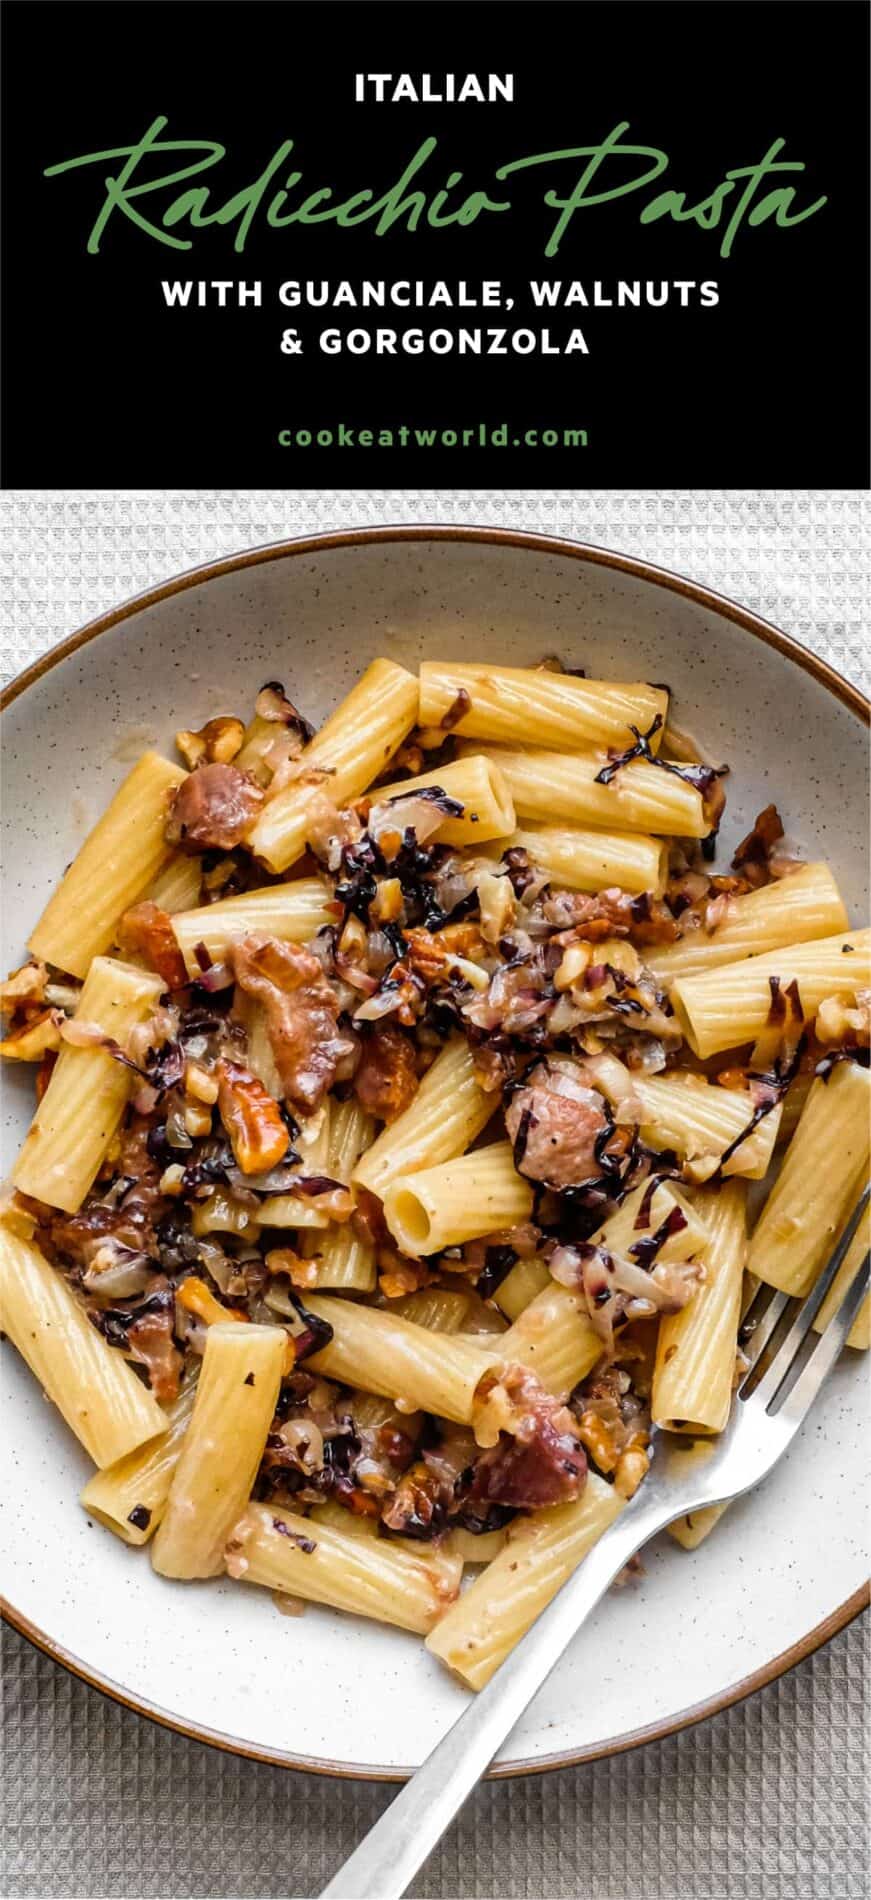 A bowl of rigatoni pasta with a radicchio, walnut and guanciale sauce in a bowl with a fork